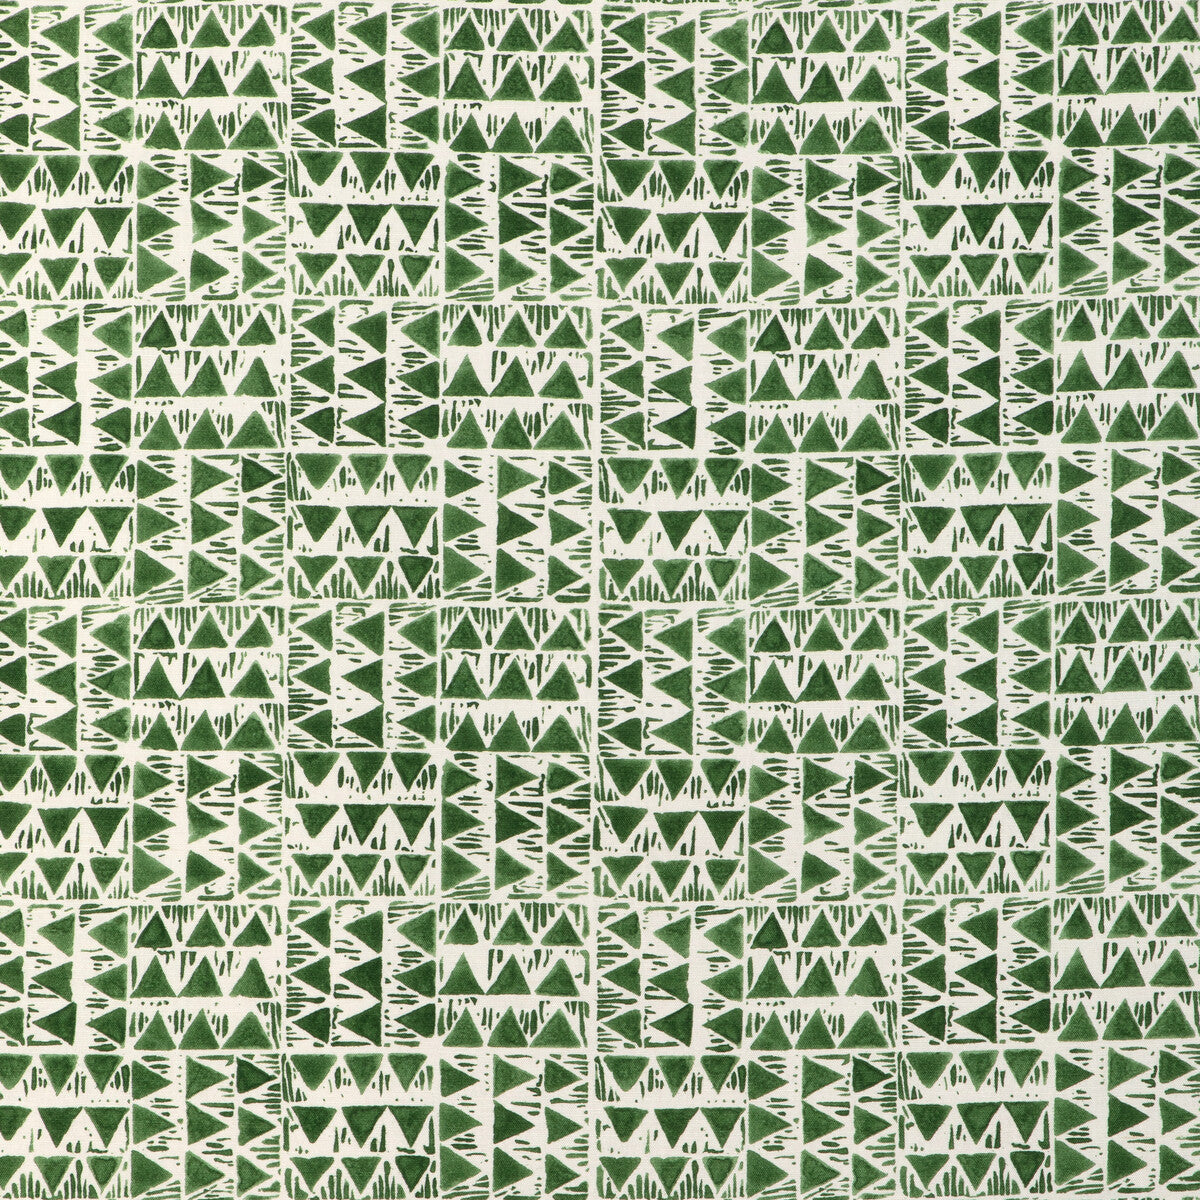 Yampa Print fabric in fern color - pattern 2020210.3.0 - by Lee Jofa in the Clare Prints collection